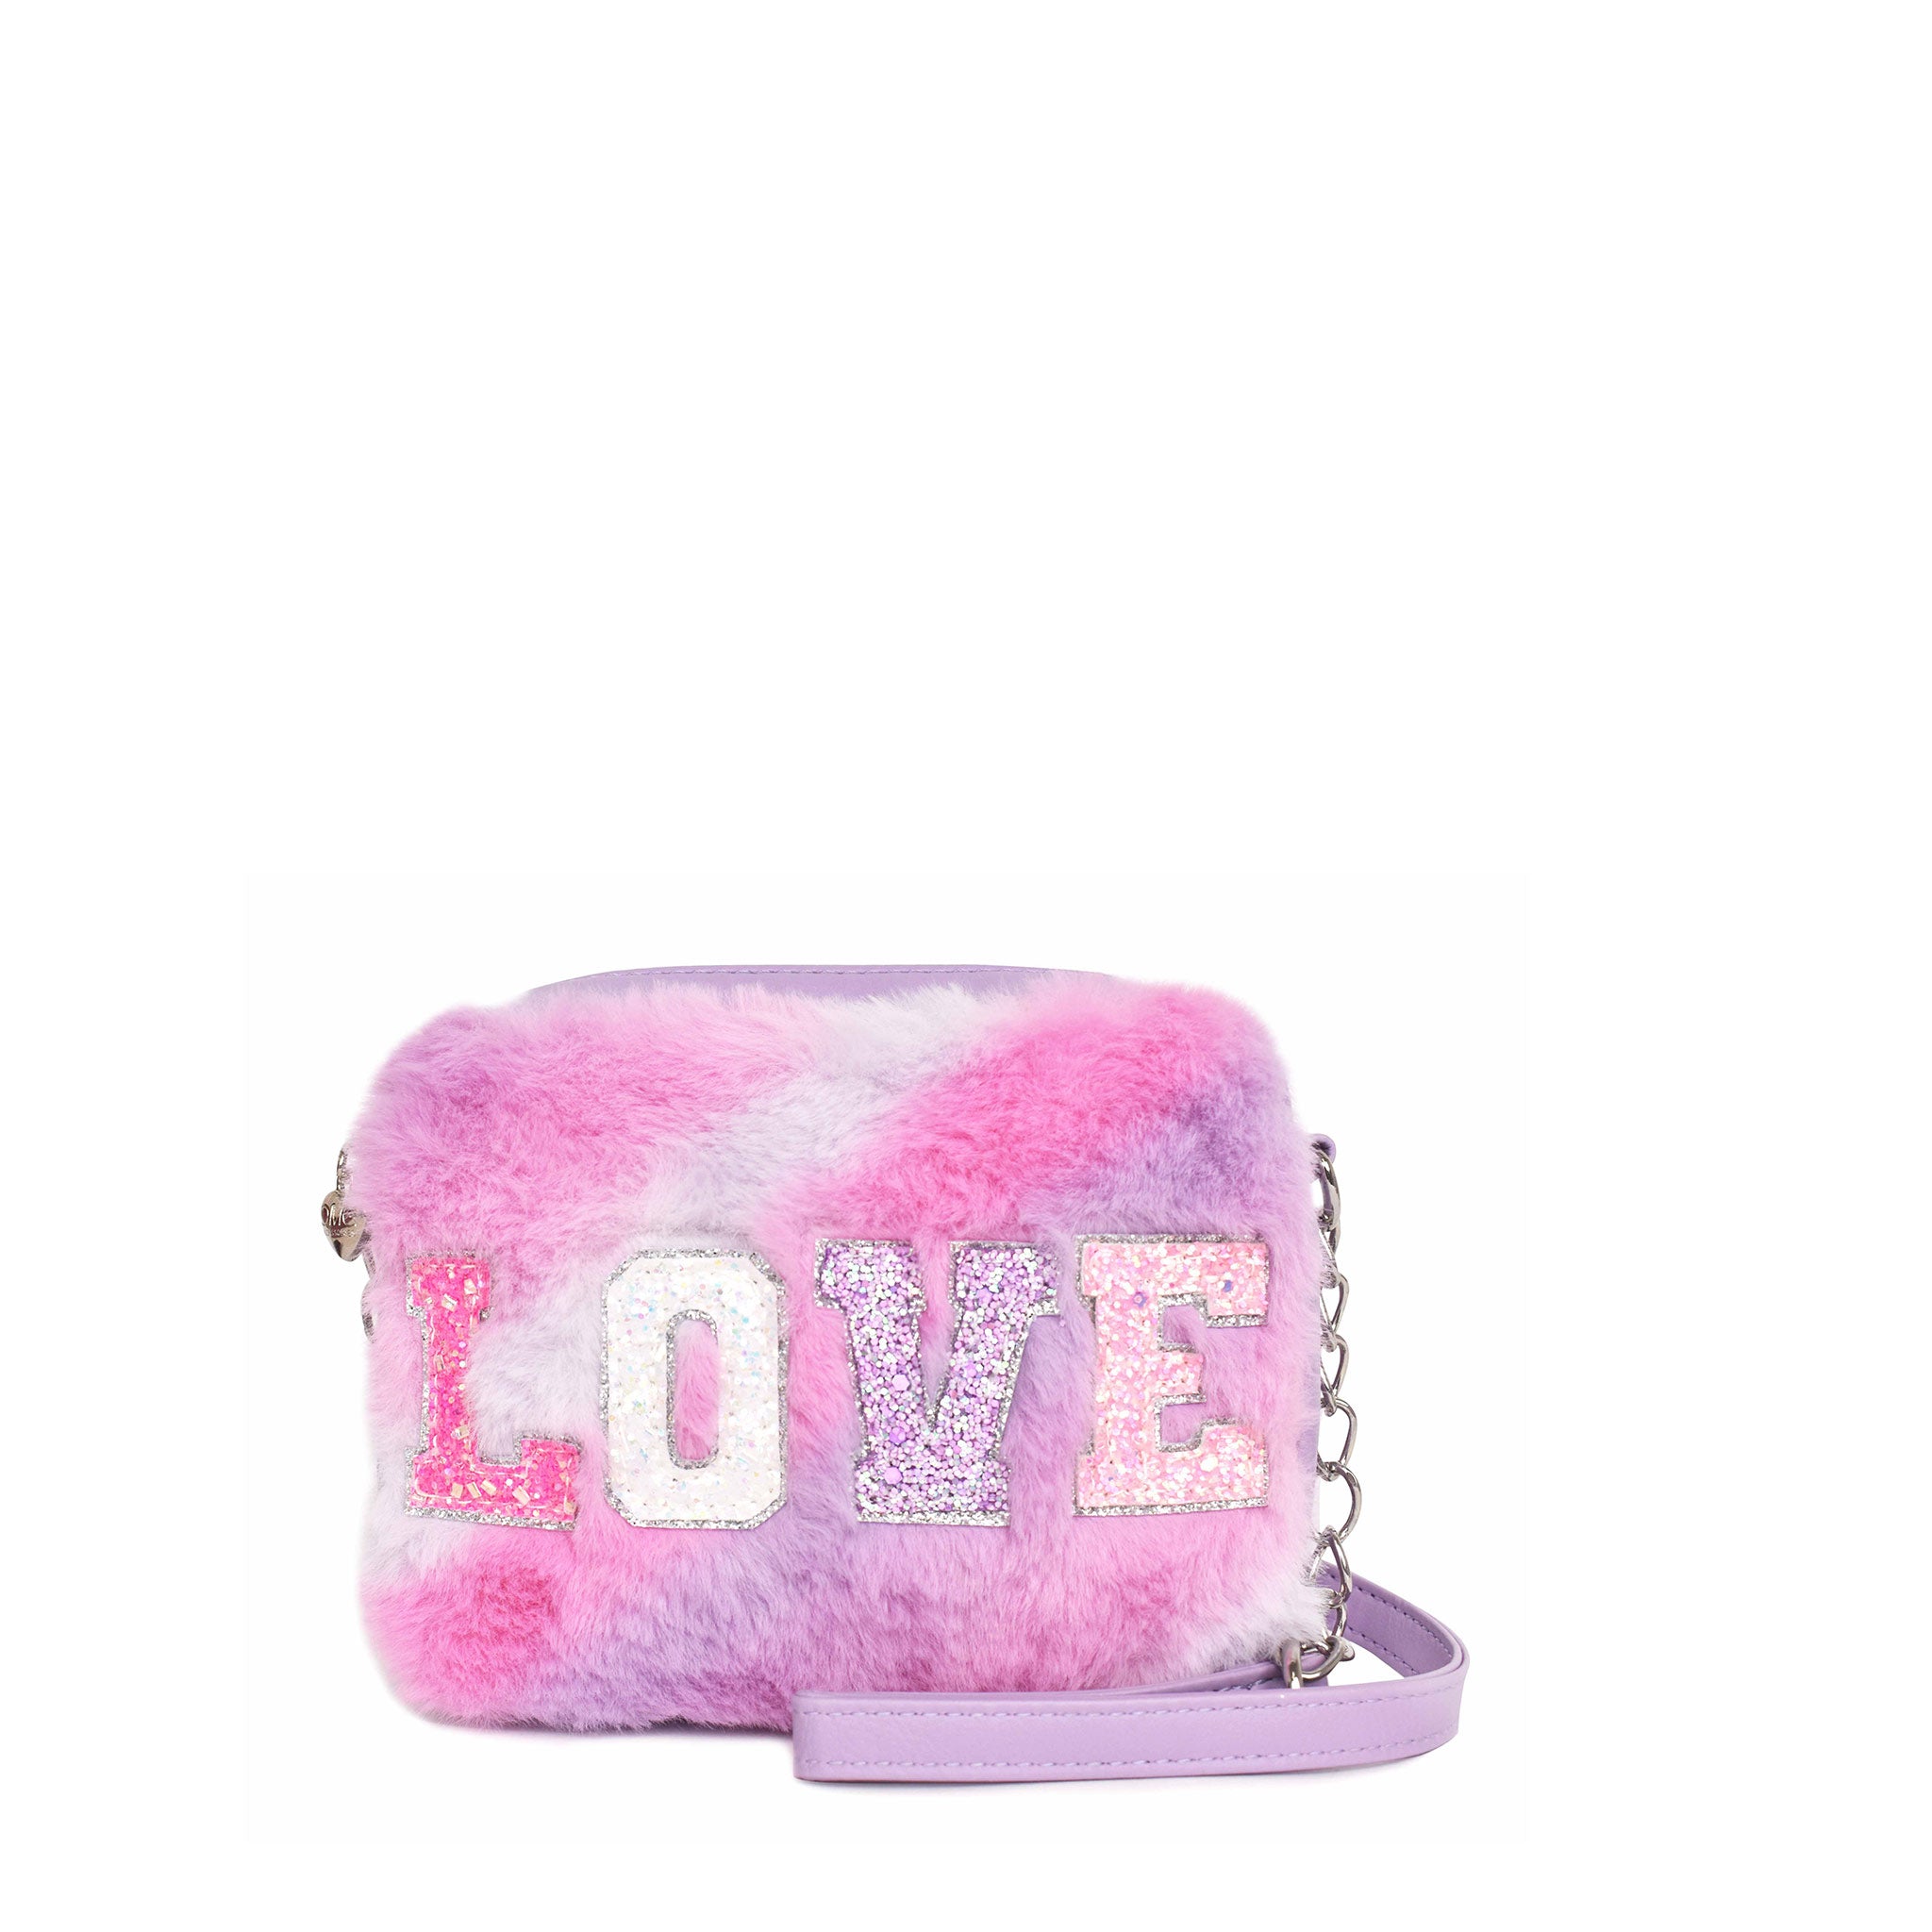 Front view of an ombre plush crossbody bag with varsity letters 'LOVE' appliqué